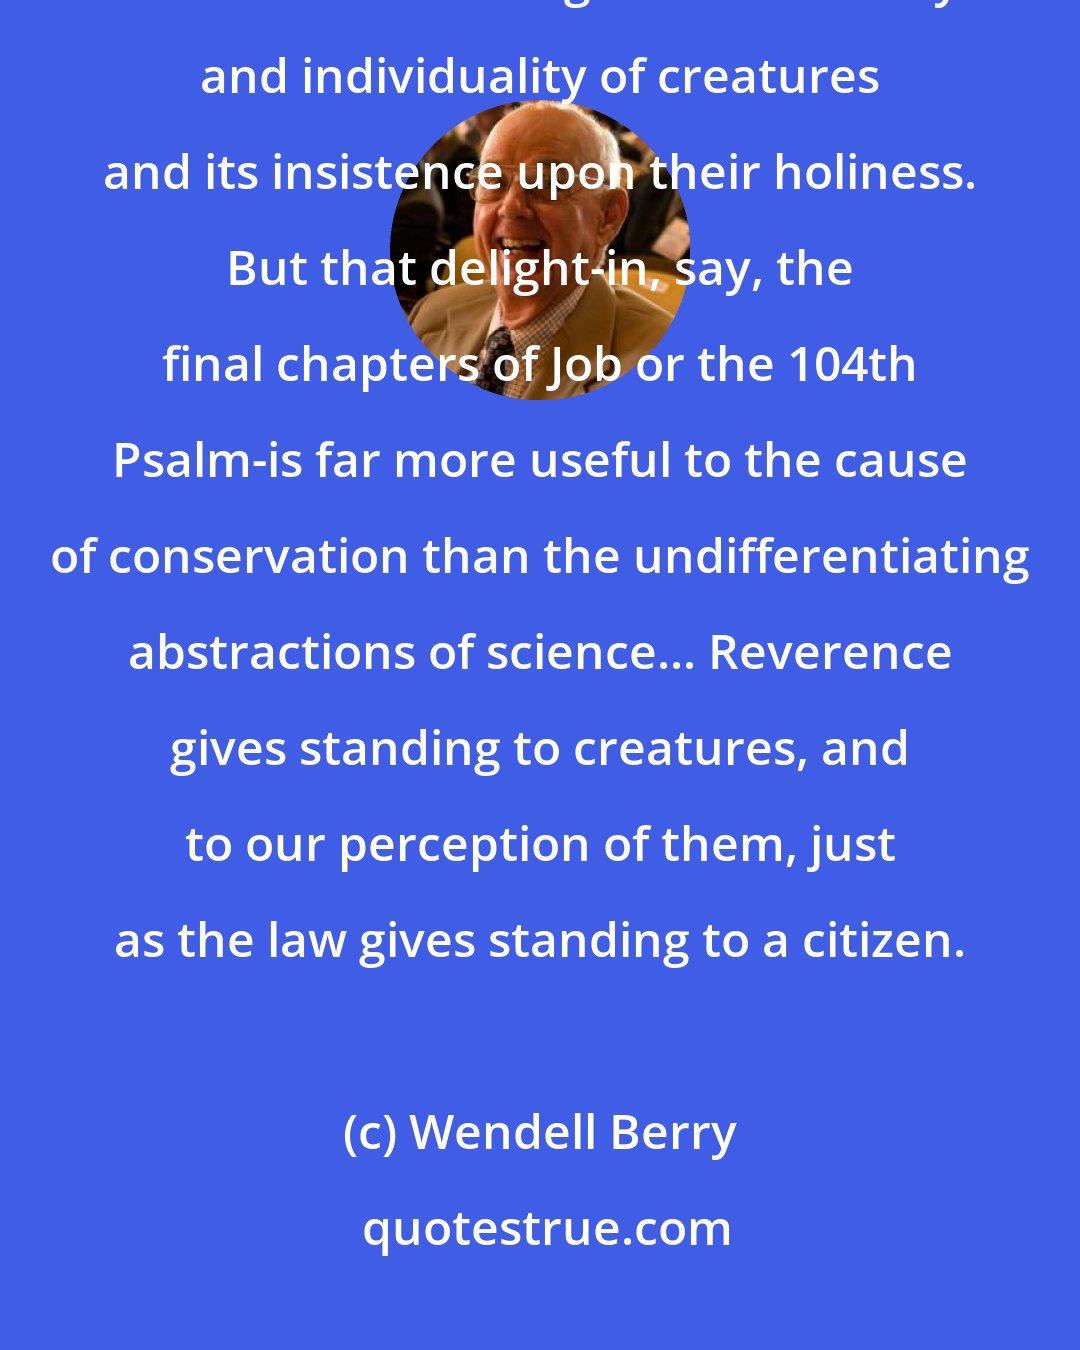 Wendell Berry: People who blame the Bible for the modern destruction of nature have failed to see its delight in the variety and individuality of creatures and its insistence upon their holiness. But that delight-in, say, the final chapters of Job or the 104th Psalm-is far more useful to the cause of conservation than the undifferentiating abstractions of science... Reverence gives standing to creatures, and to our perception of them, just as the law gives standing to a citizen.